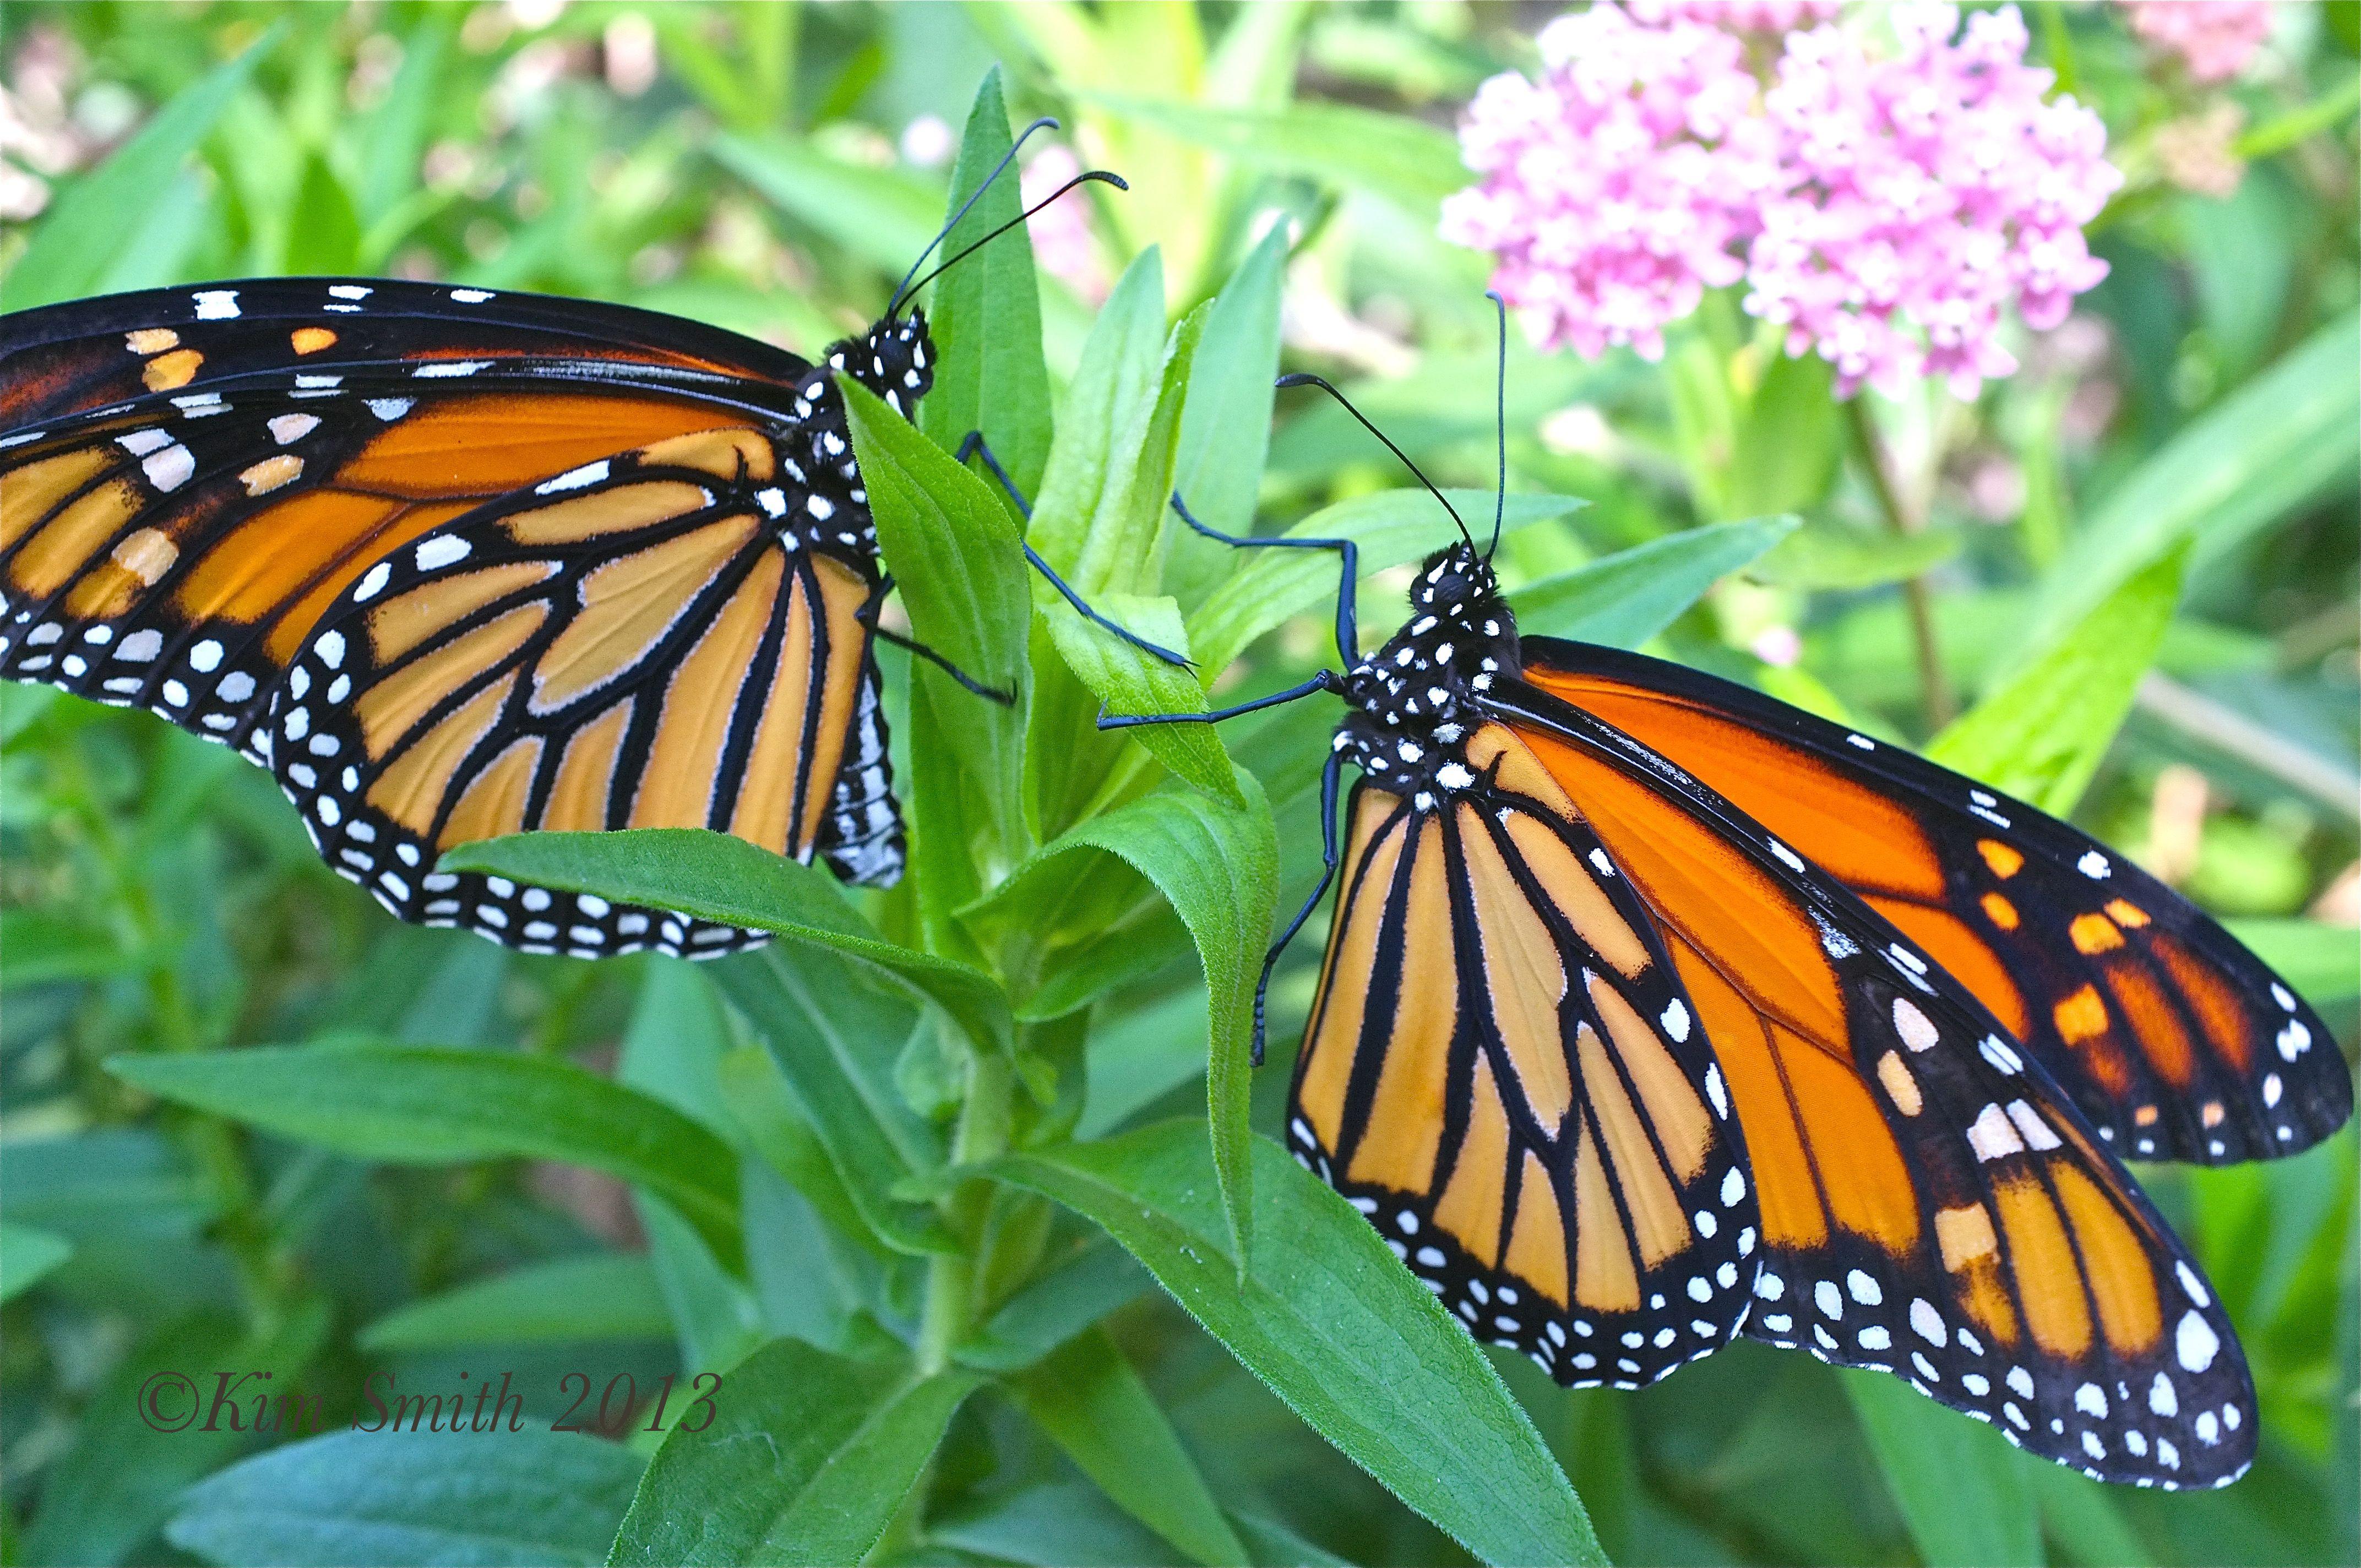 How Exactly is Monsanto's Roundup Ravaging the Monarch Butterfly